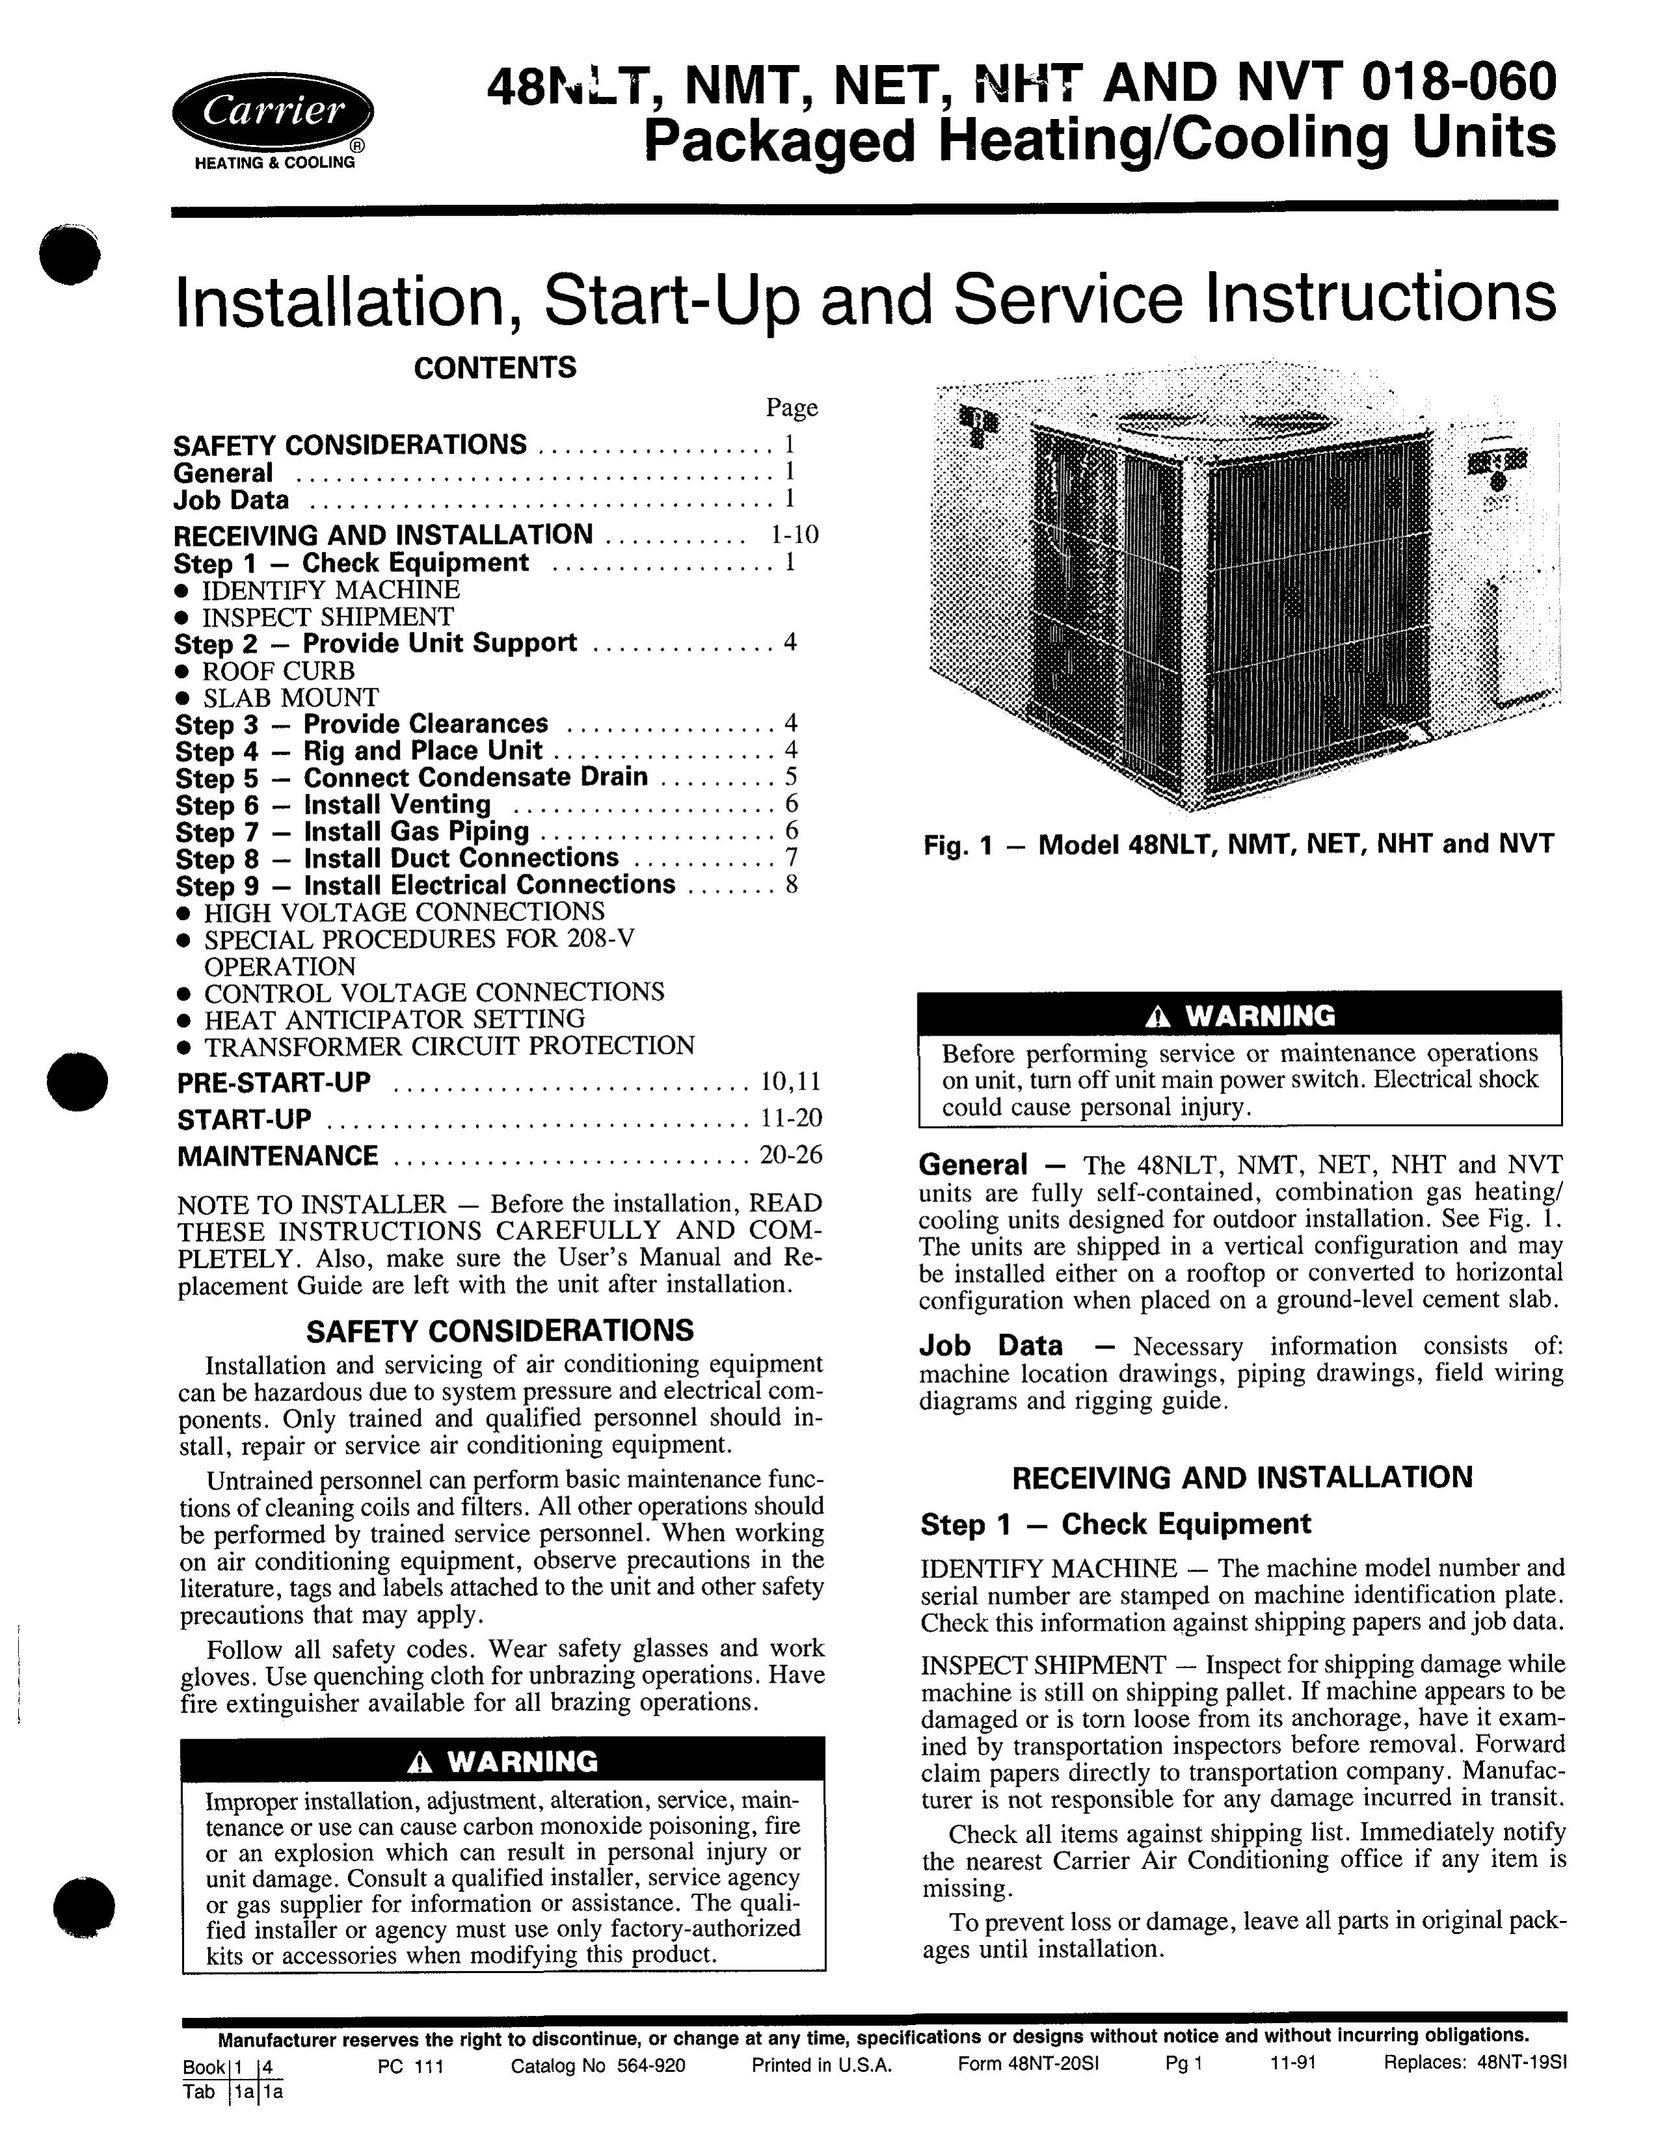 Carrier 48NET Heating System User Manual